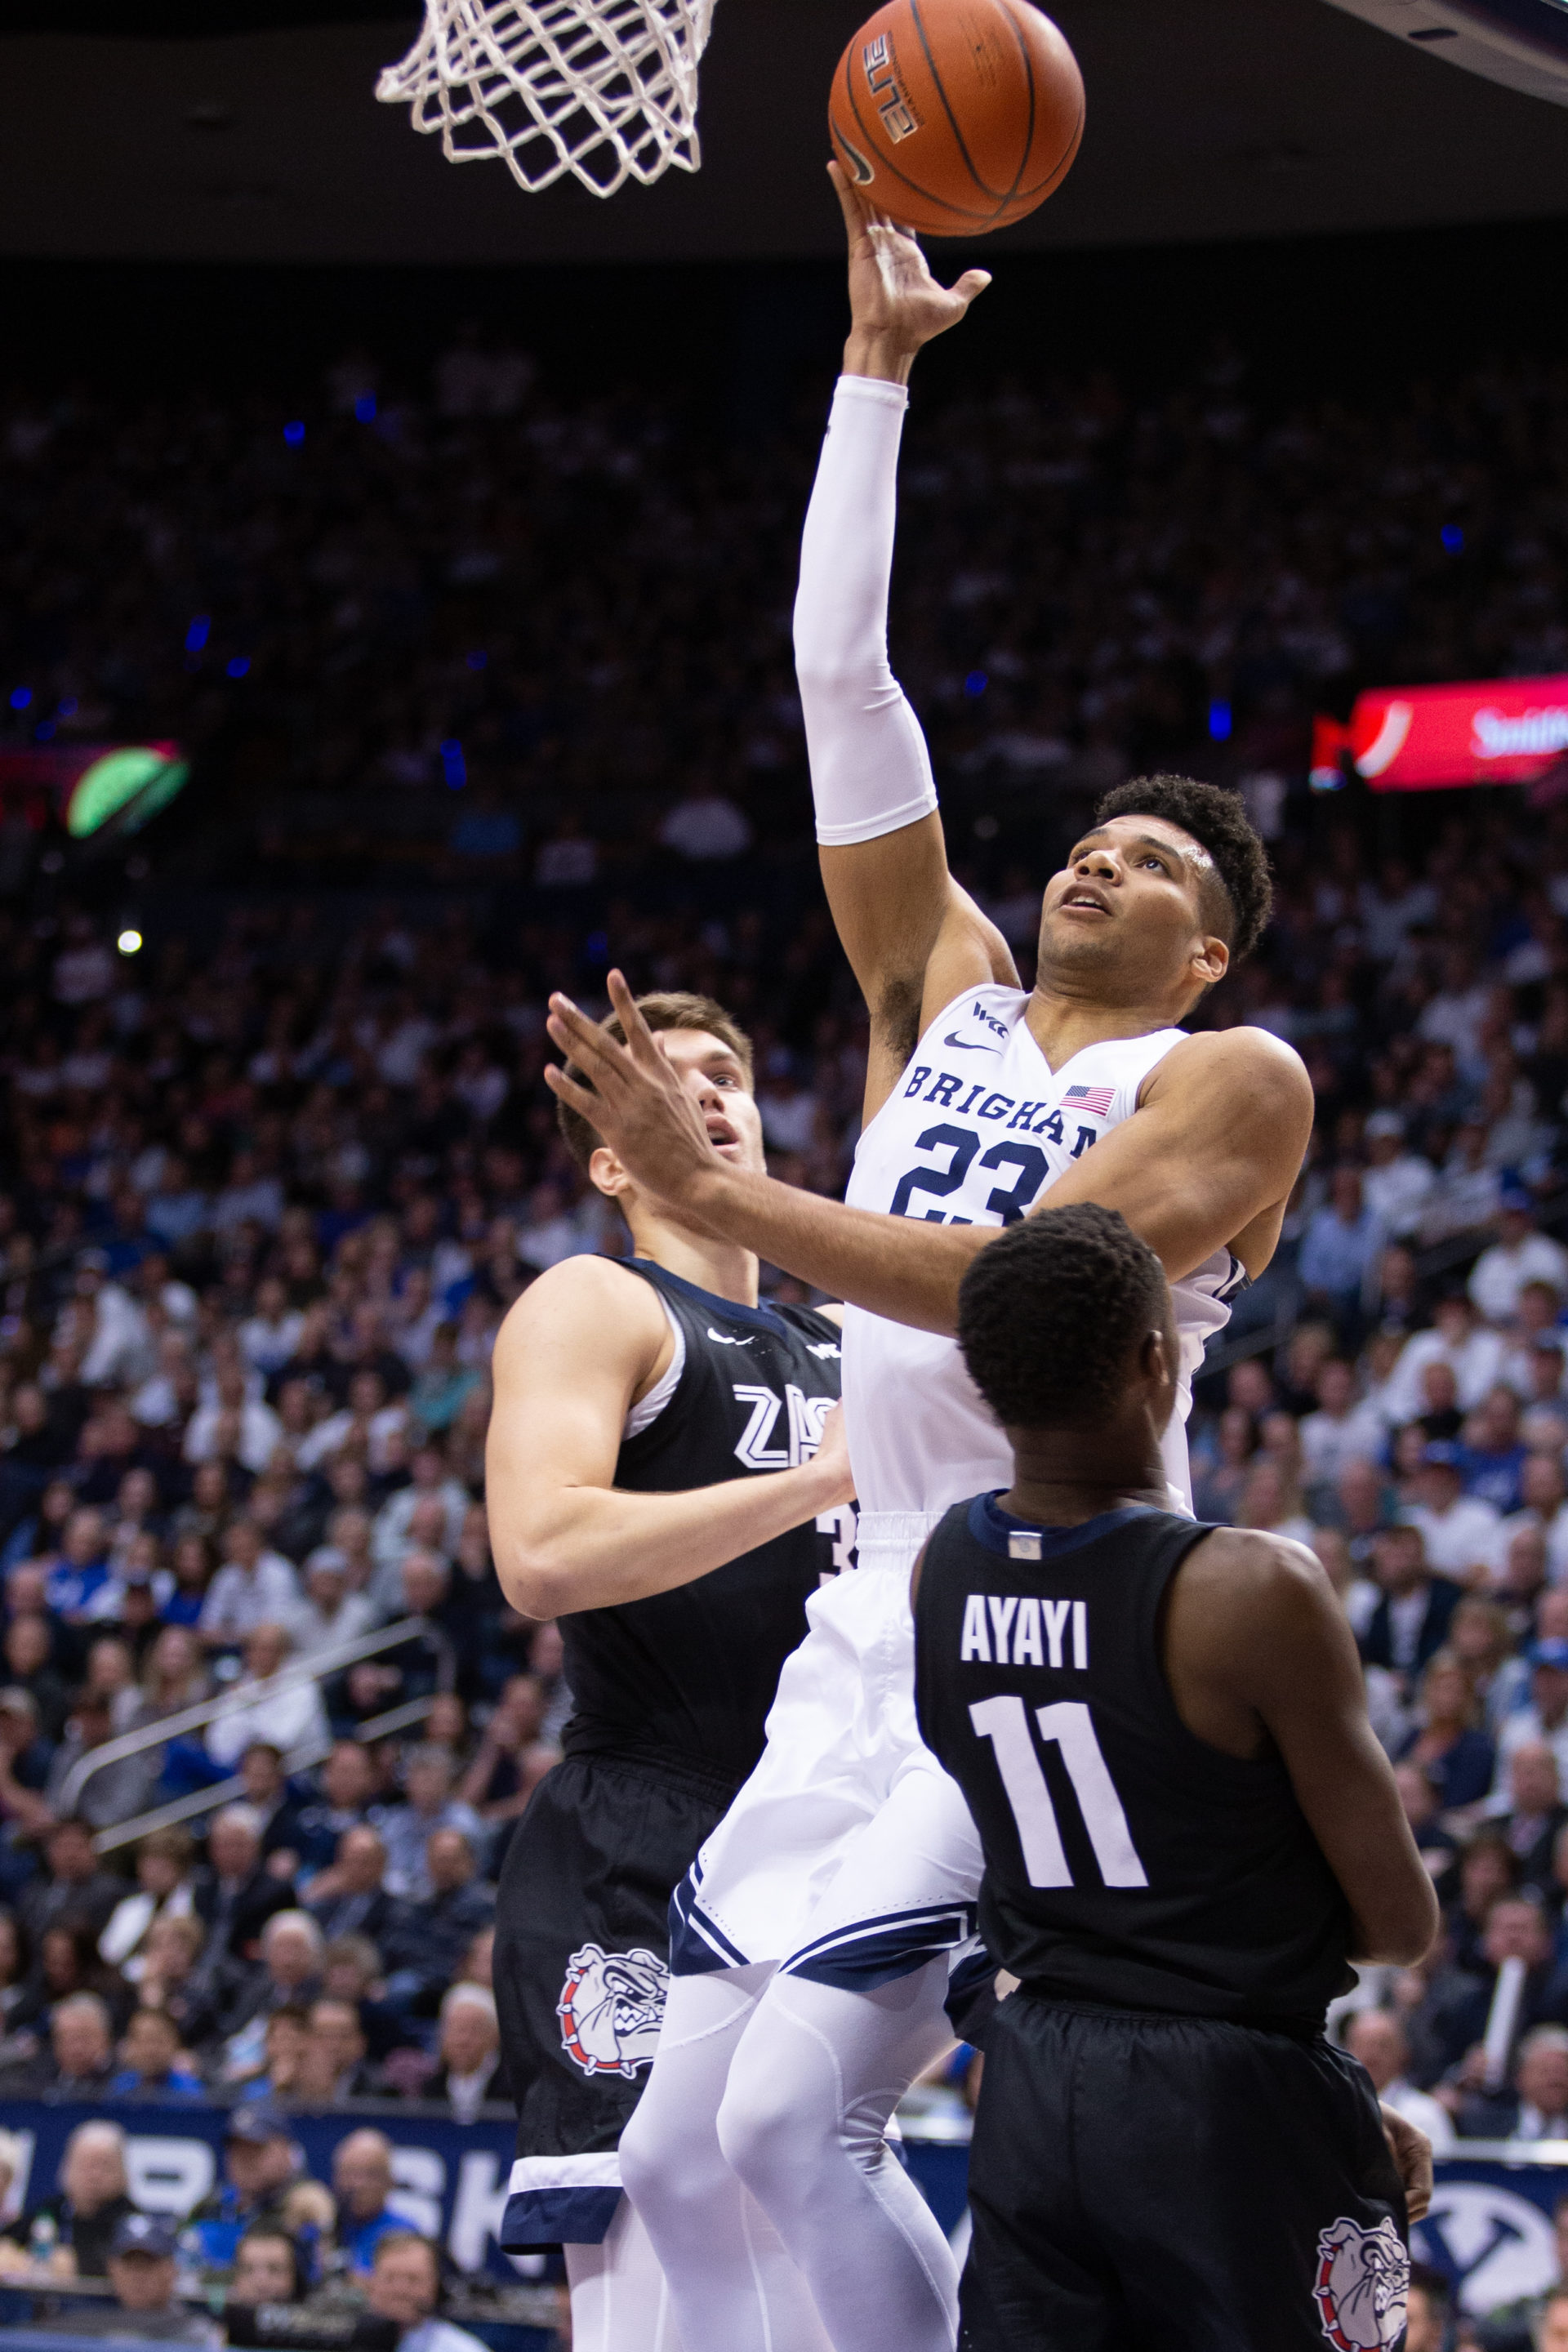 Photo Story No. 23 BYU takes down No. 2 Gonzaga in historic event that